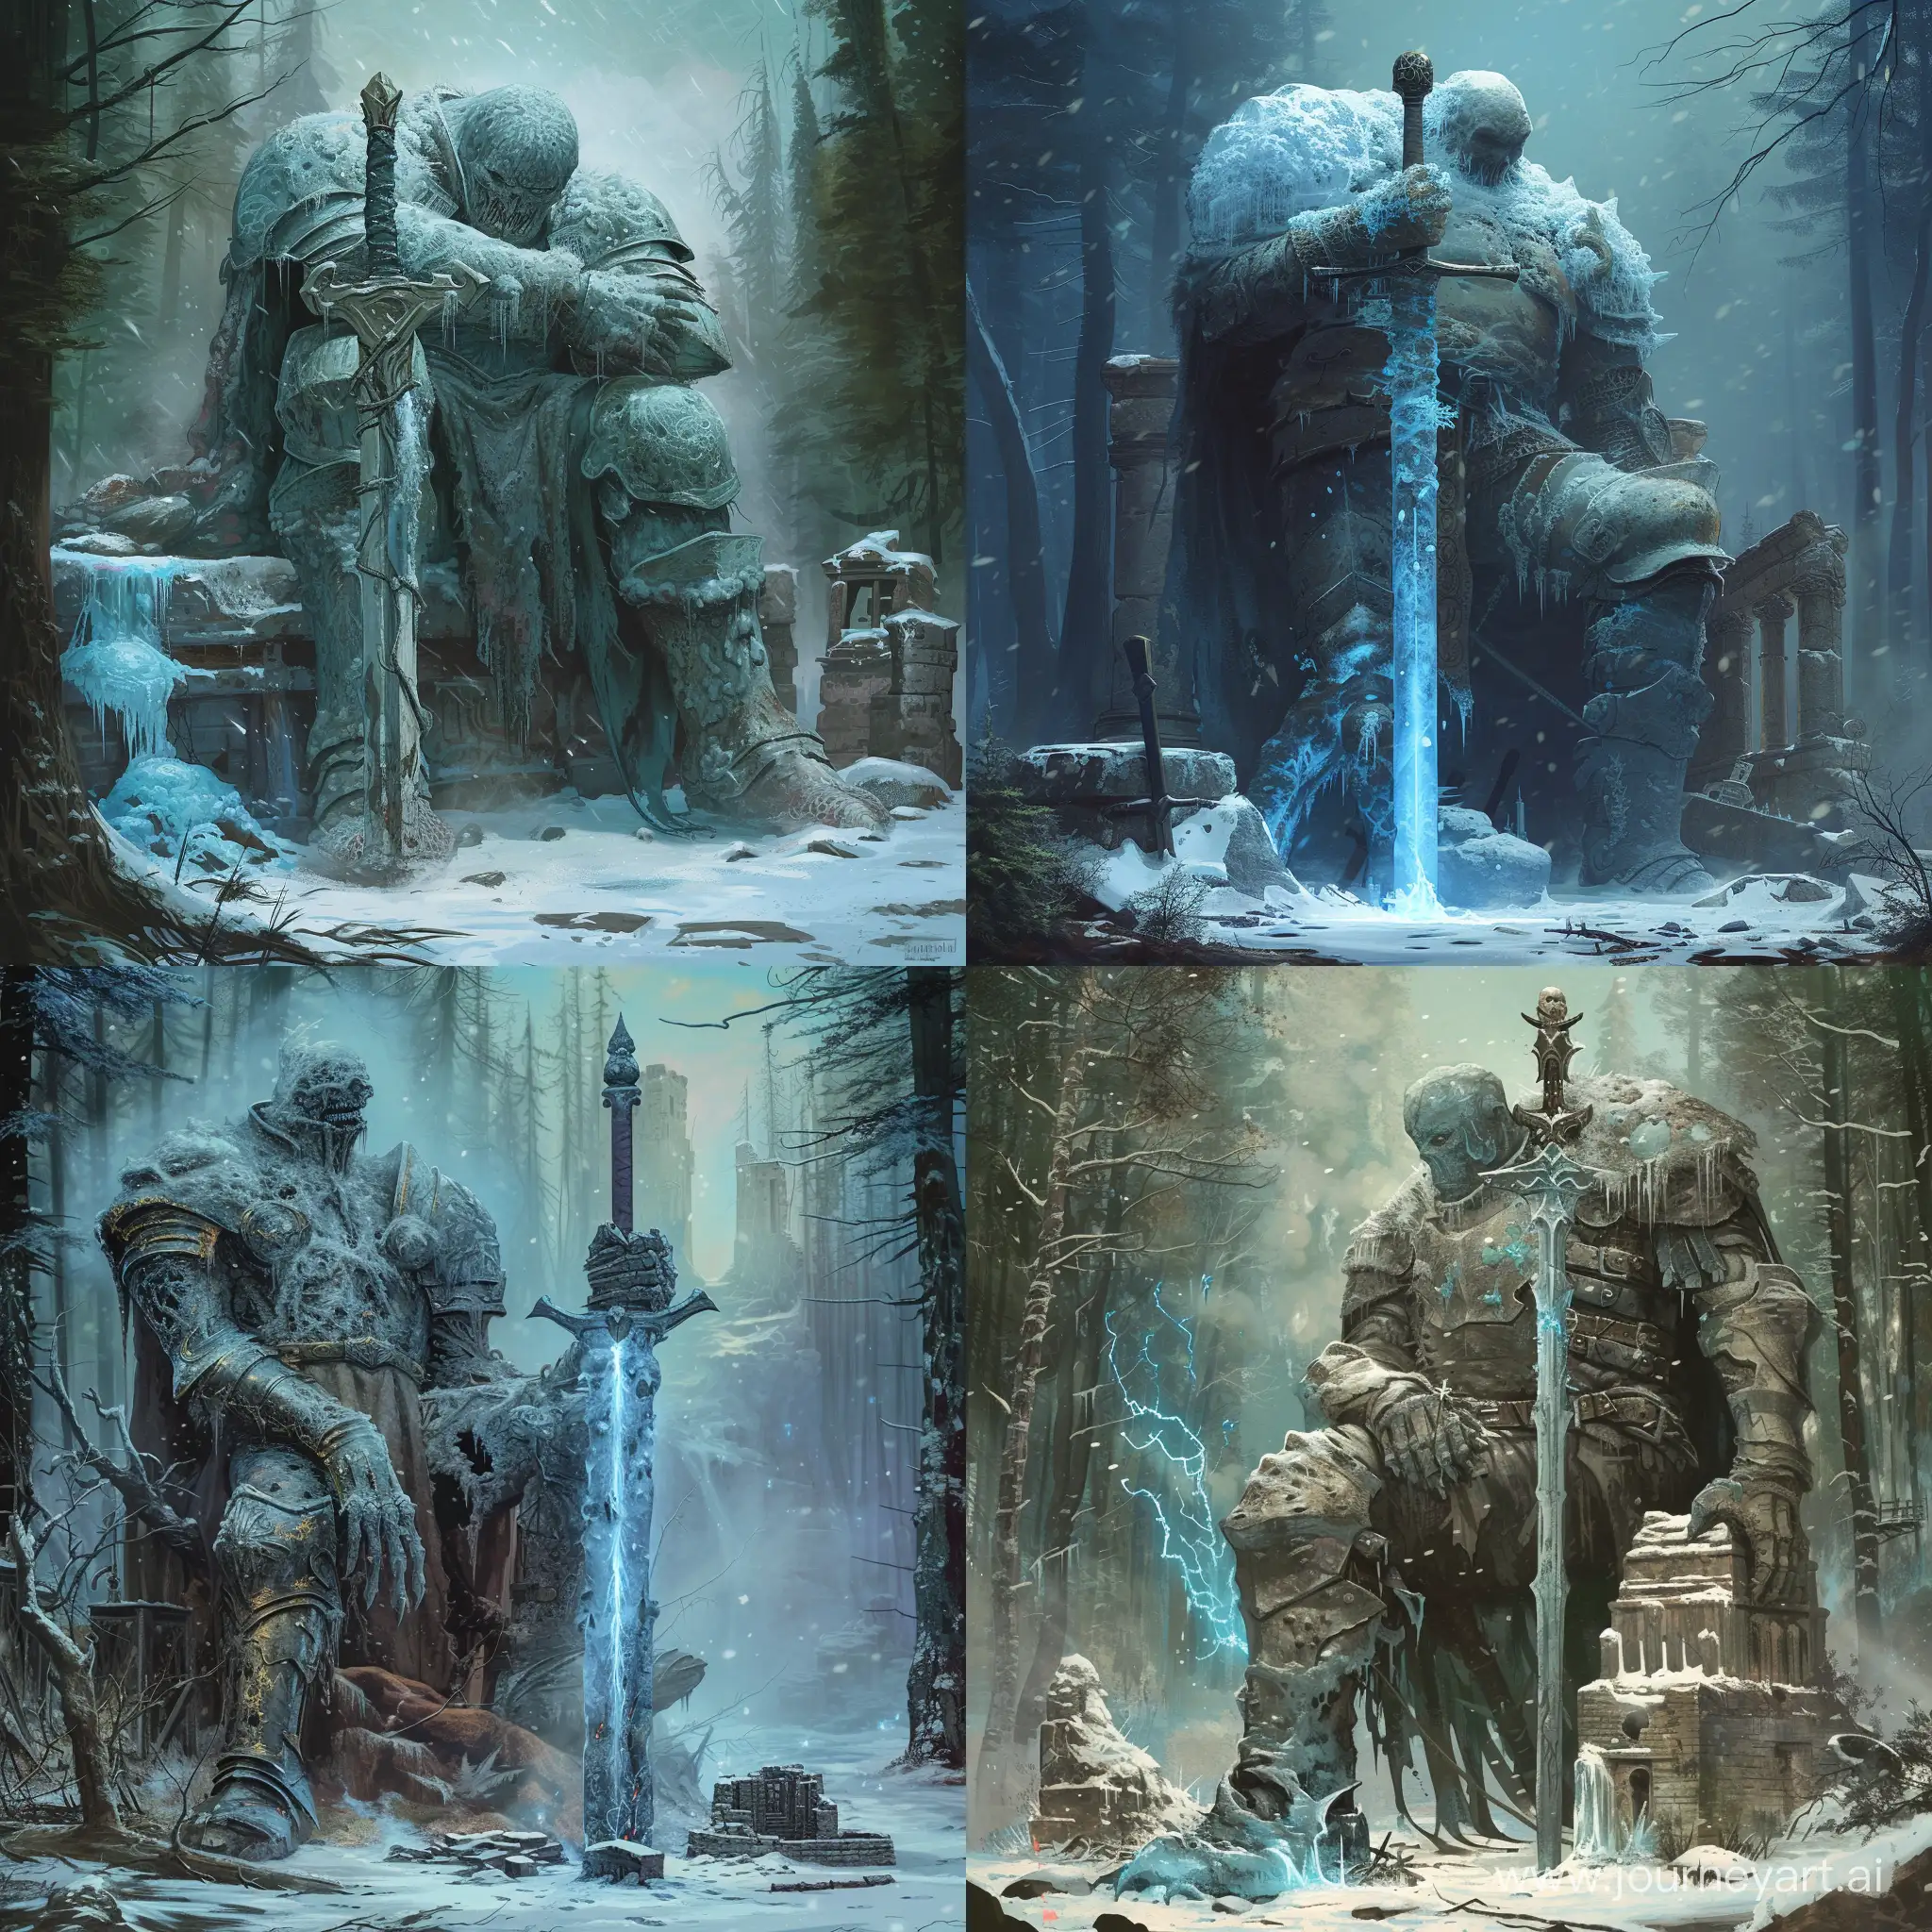 Dark-Fantasy-Illustration-Deformed-Knight-with-Ice-Growth-and-Magical-Sword-in-Ruined-Forest